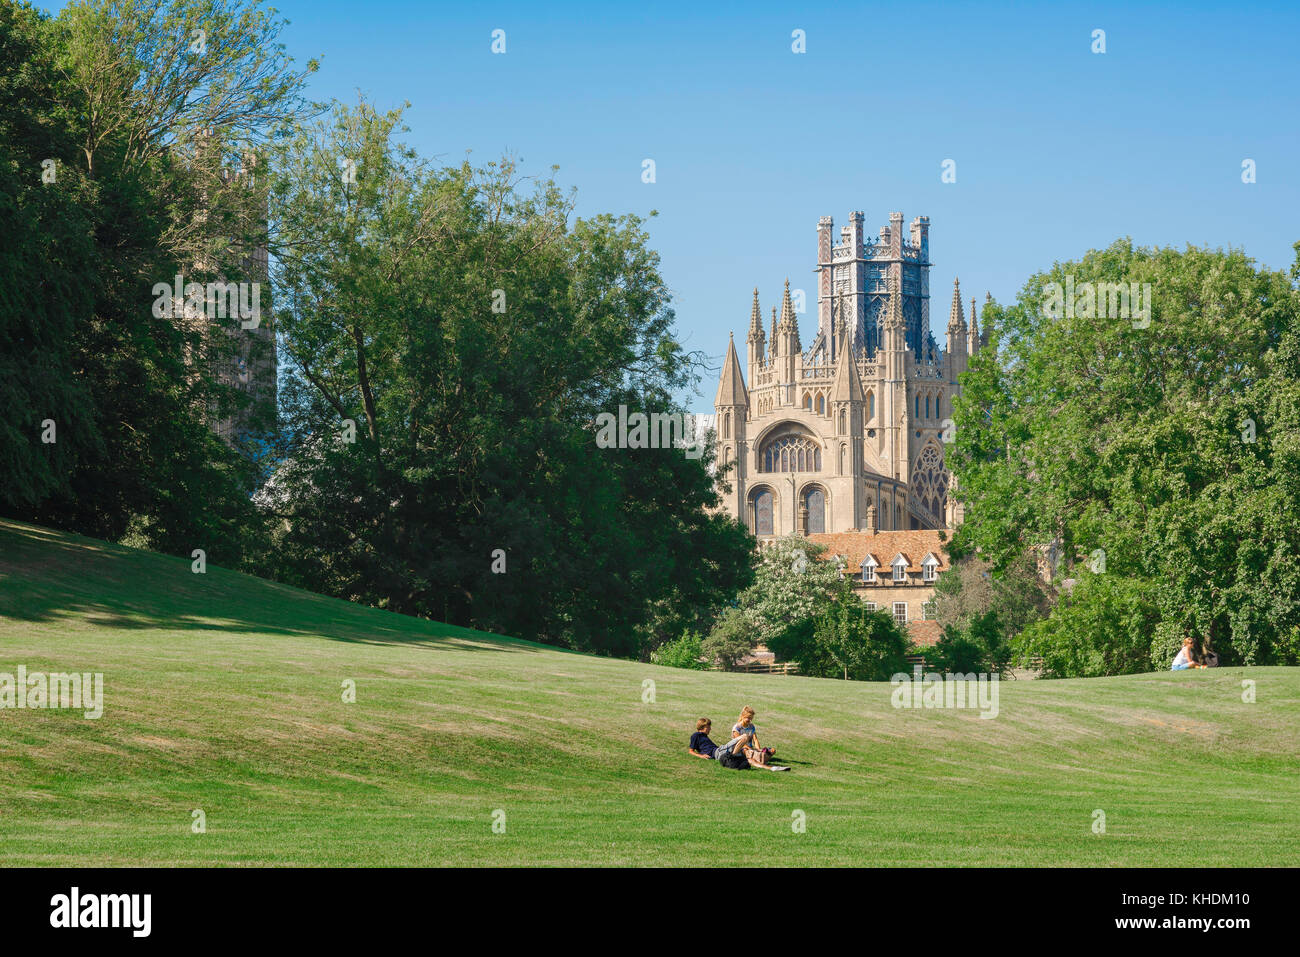 Ely Cambridgeshire UK, view in summer of the Octagon tower of Ely Cathedral rising high above Cherry Hill Park in the city of Ely, Cambridgeshire. Stock Photo